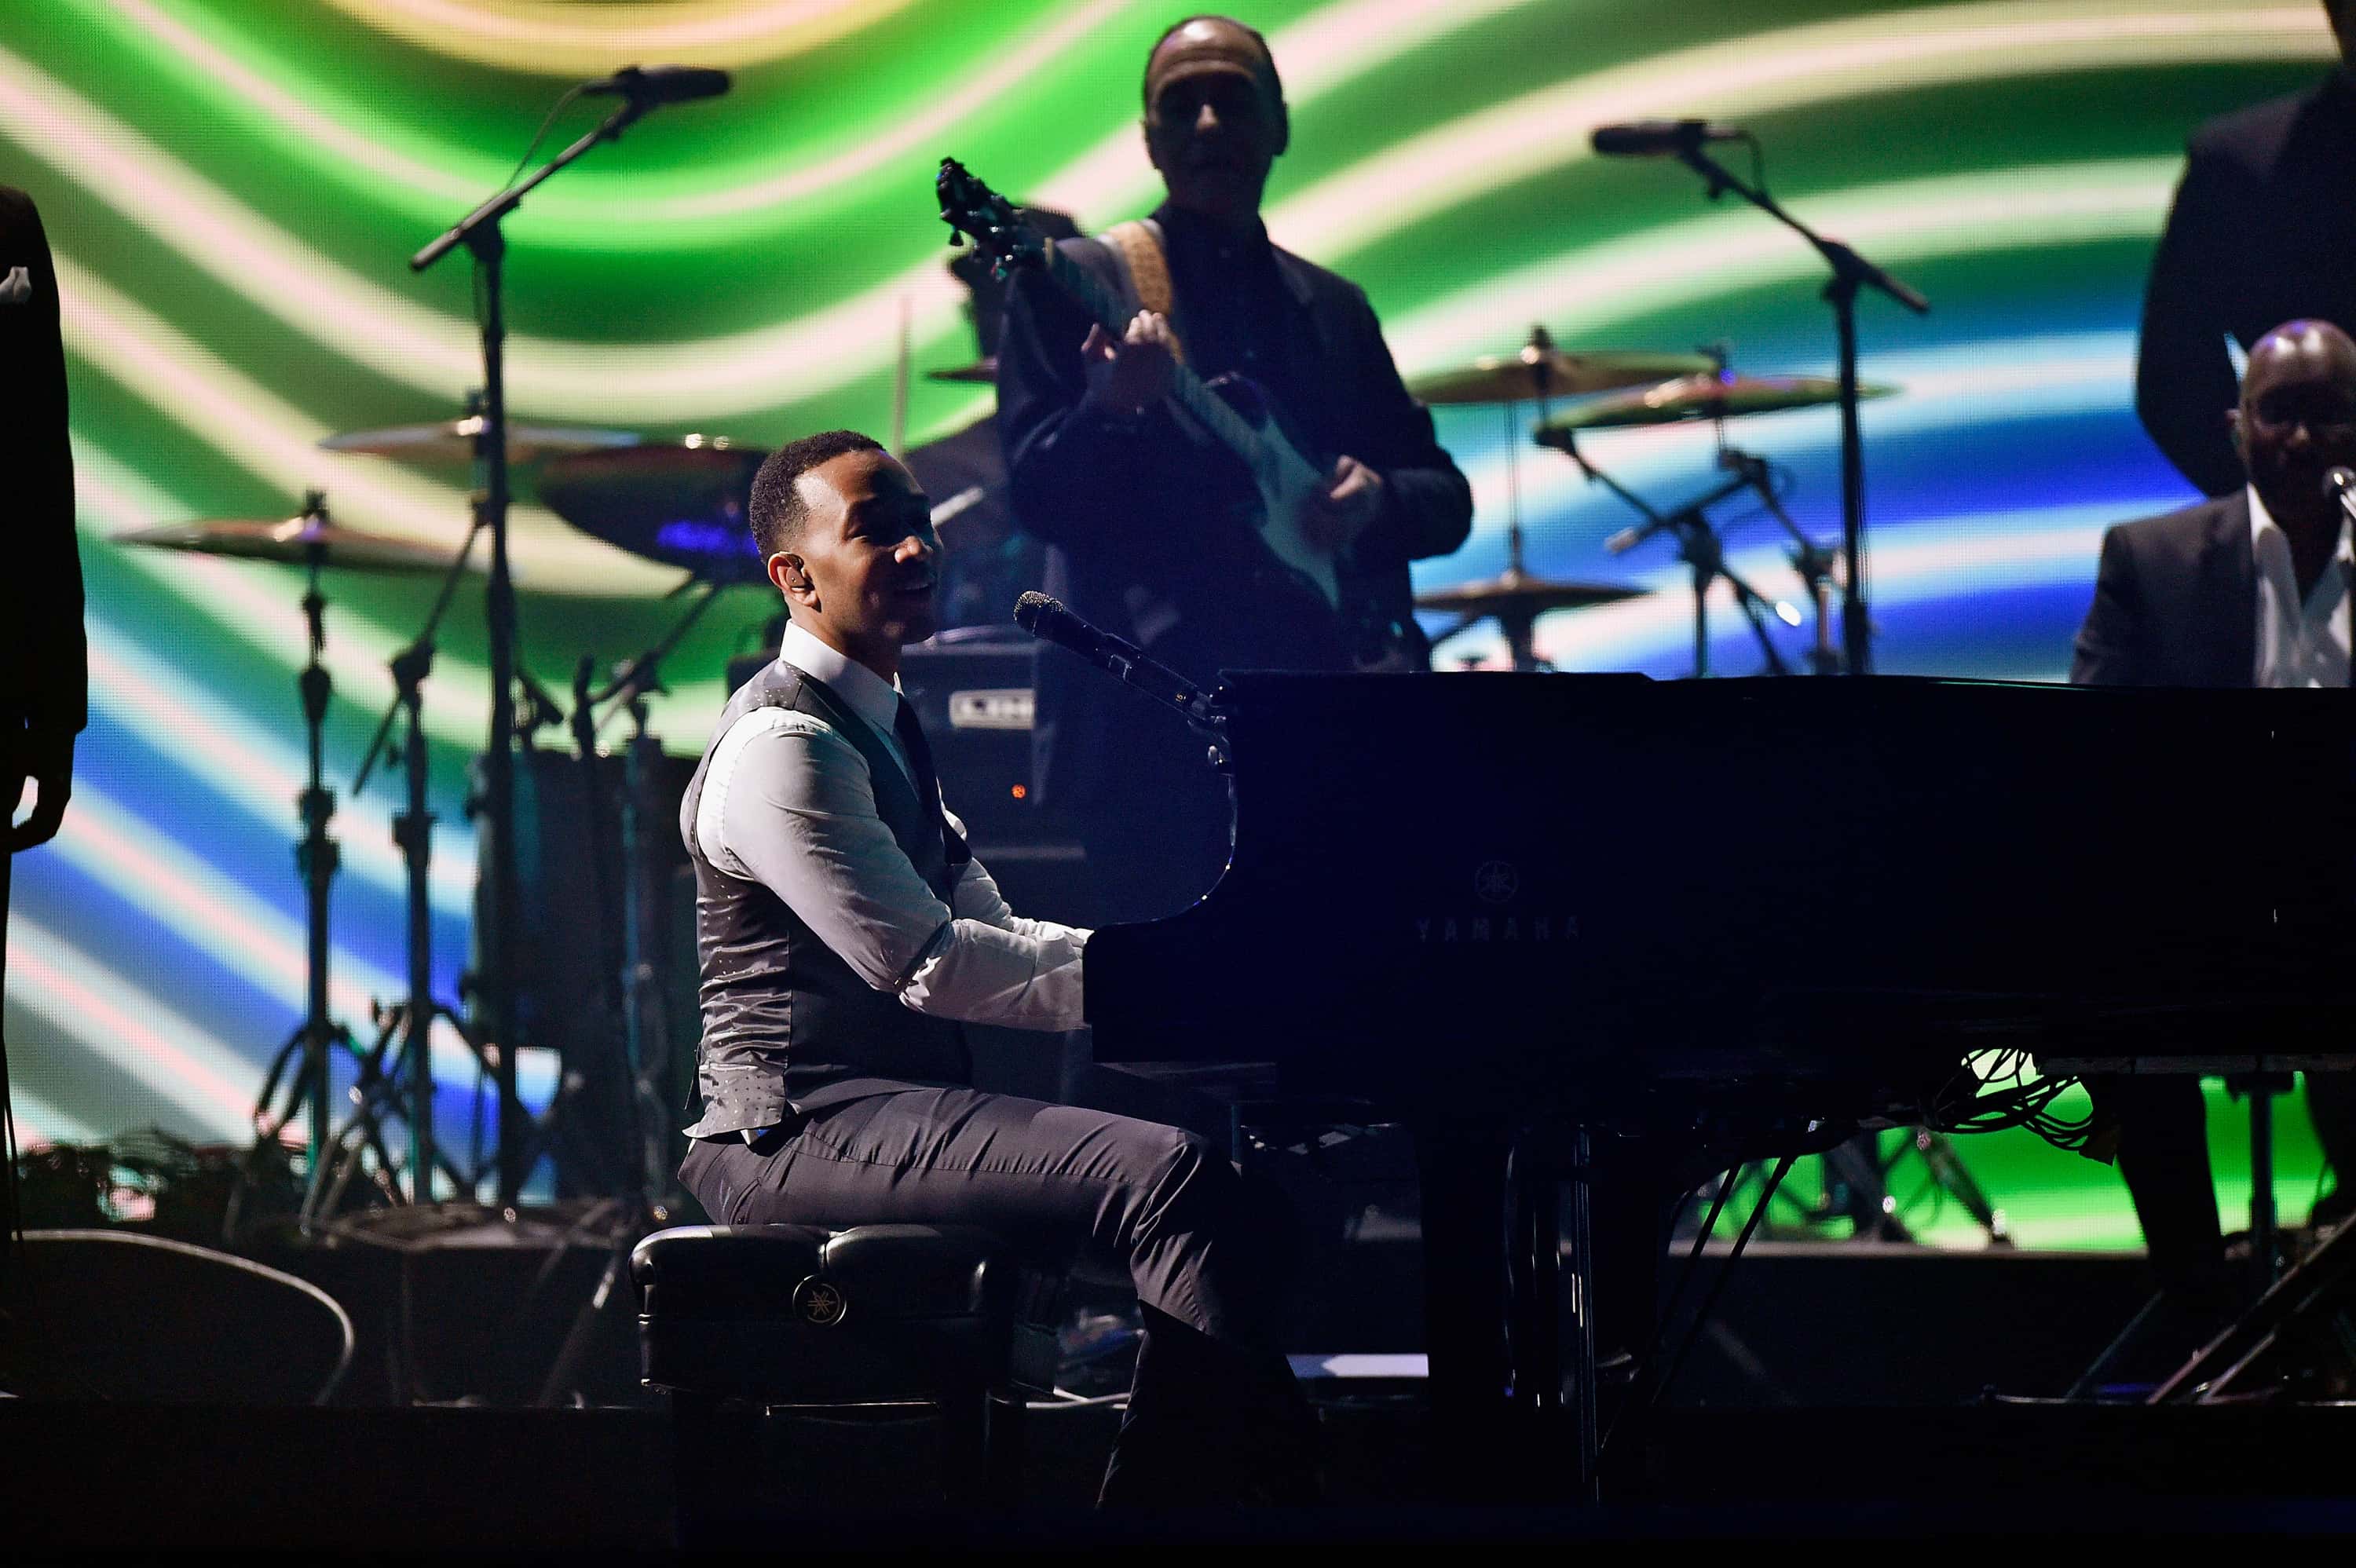 The 58th GRAMMY Awards - Show. John Legend on stage.